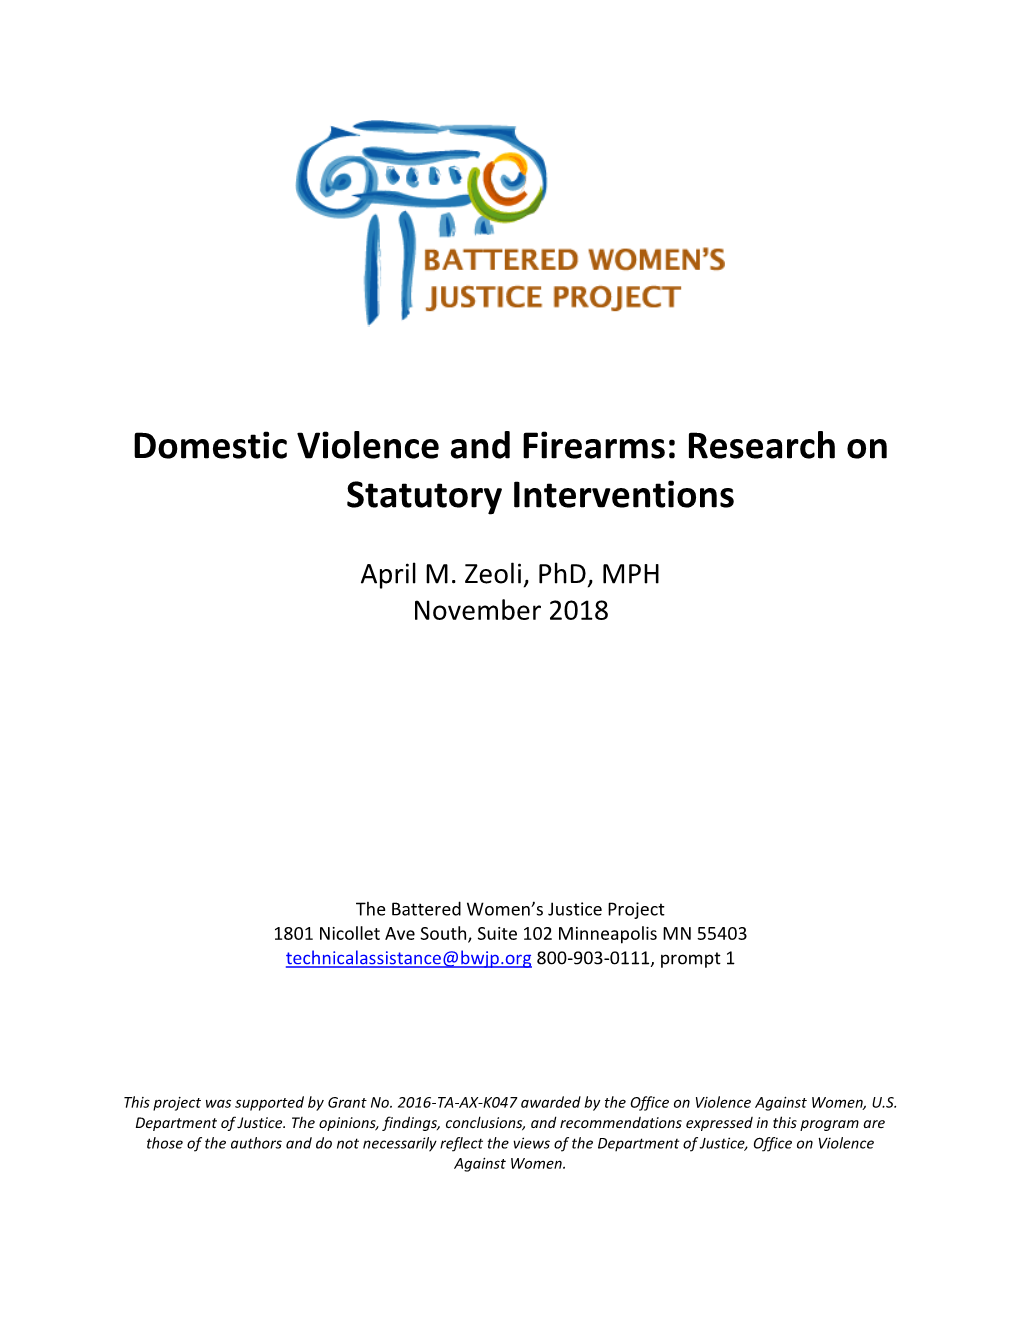 Domestic Violence and Firearms: Research on Statutory Interventions